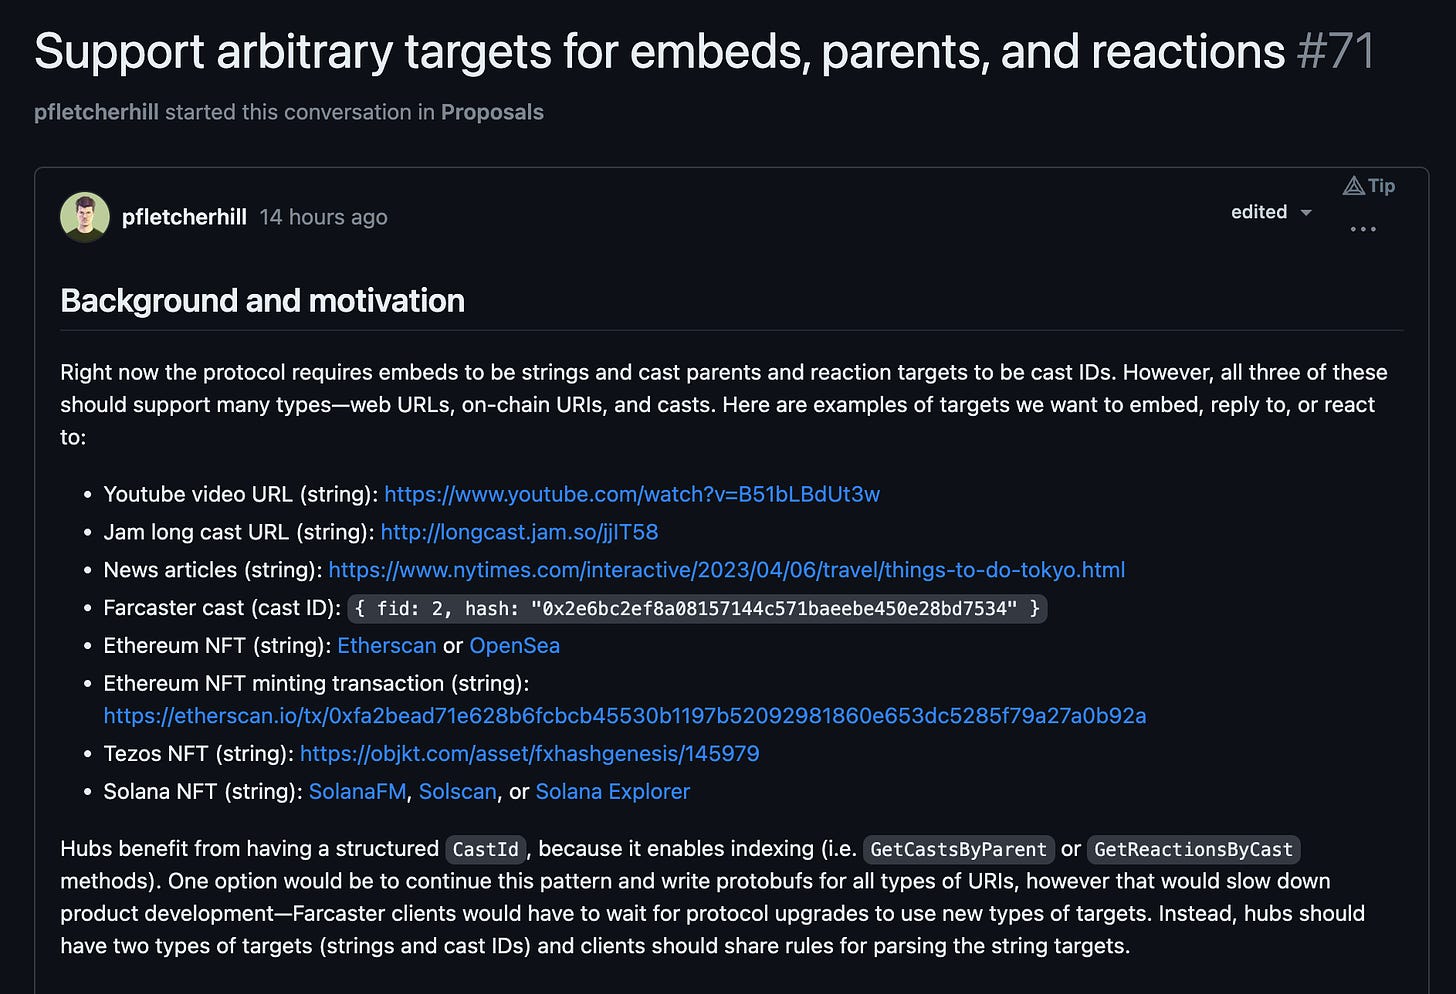 Some other examples of embeds that @pfh touched on in GitHub discussions are:

- YouTube video
- News article
- Farcaster cast https://i.imgur.com/bjiR5xV.png